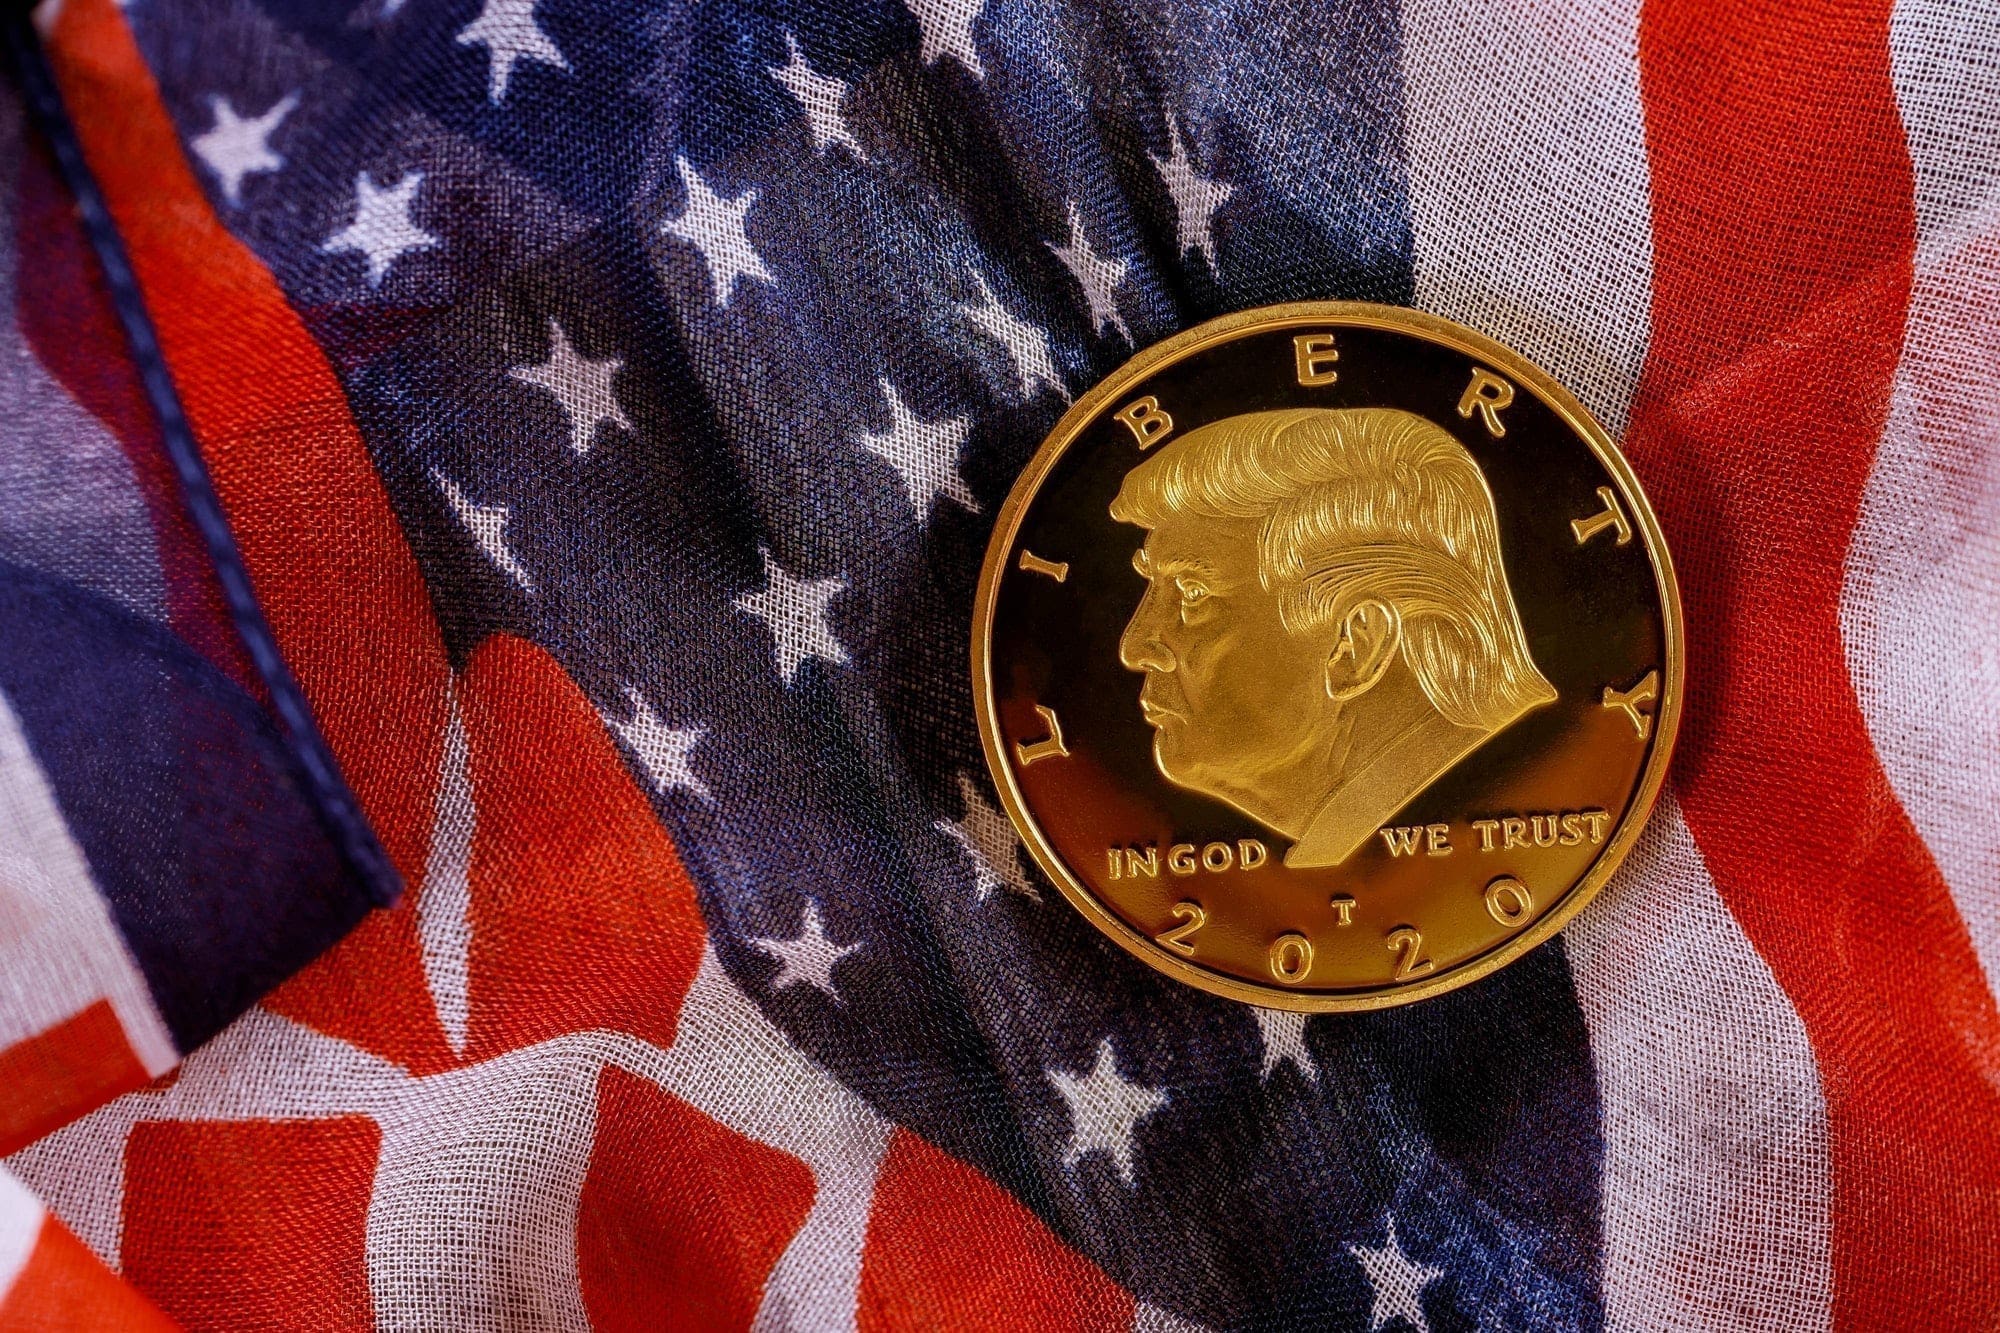 New York NY NOV 12 2019: Donald Trump coin in against usa flag in the election 2020